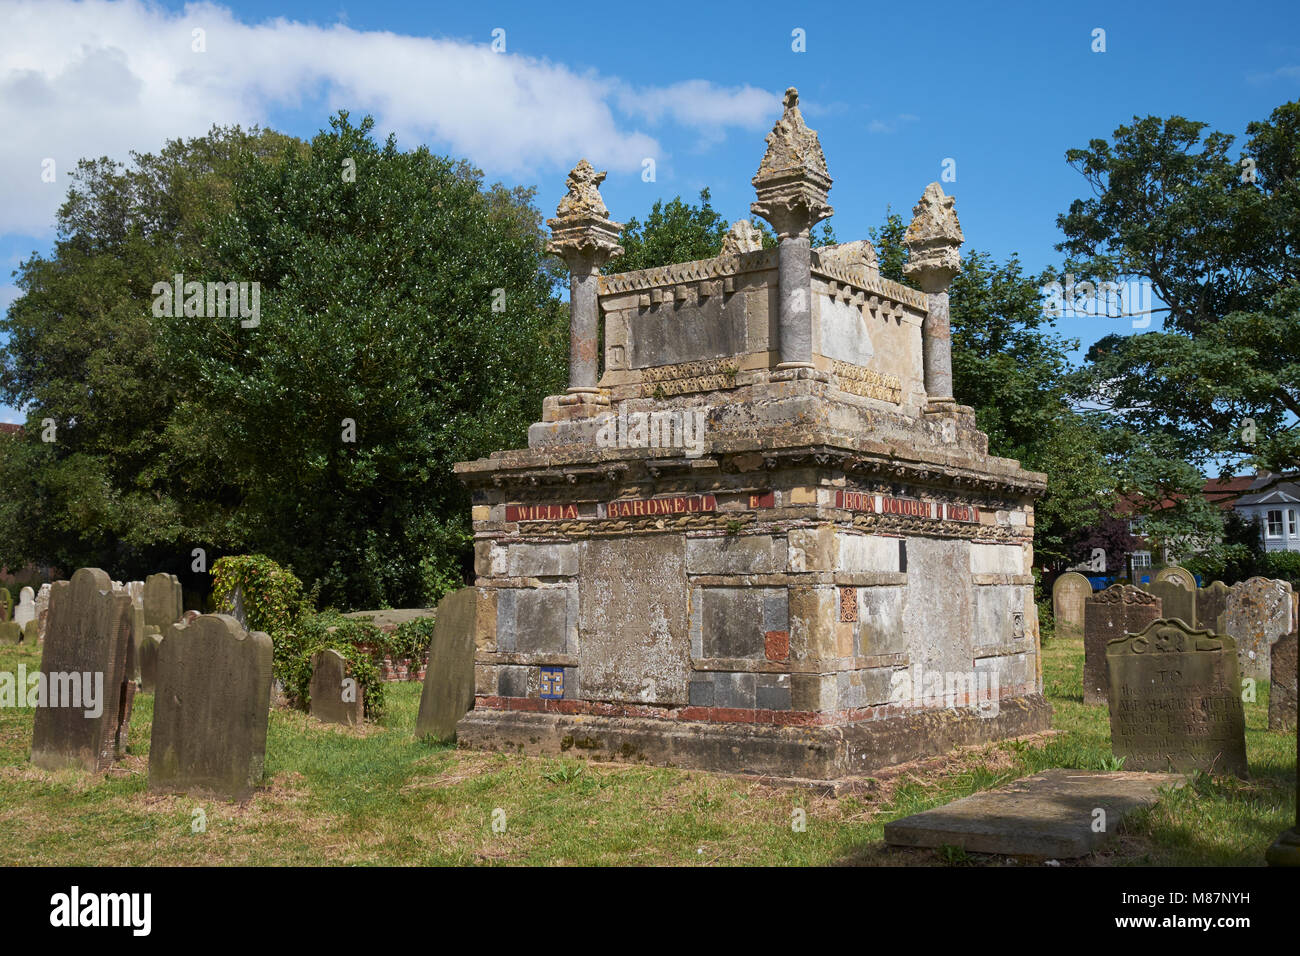 The monument to the architect William Bardwell in the churchyard of St Edmund's church, Southwold. The monument is a Grade II Listed Building. Stock Photo